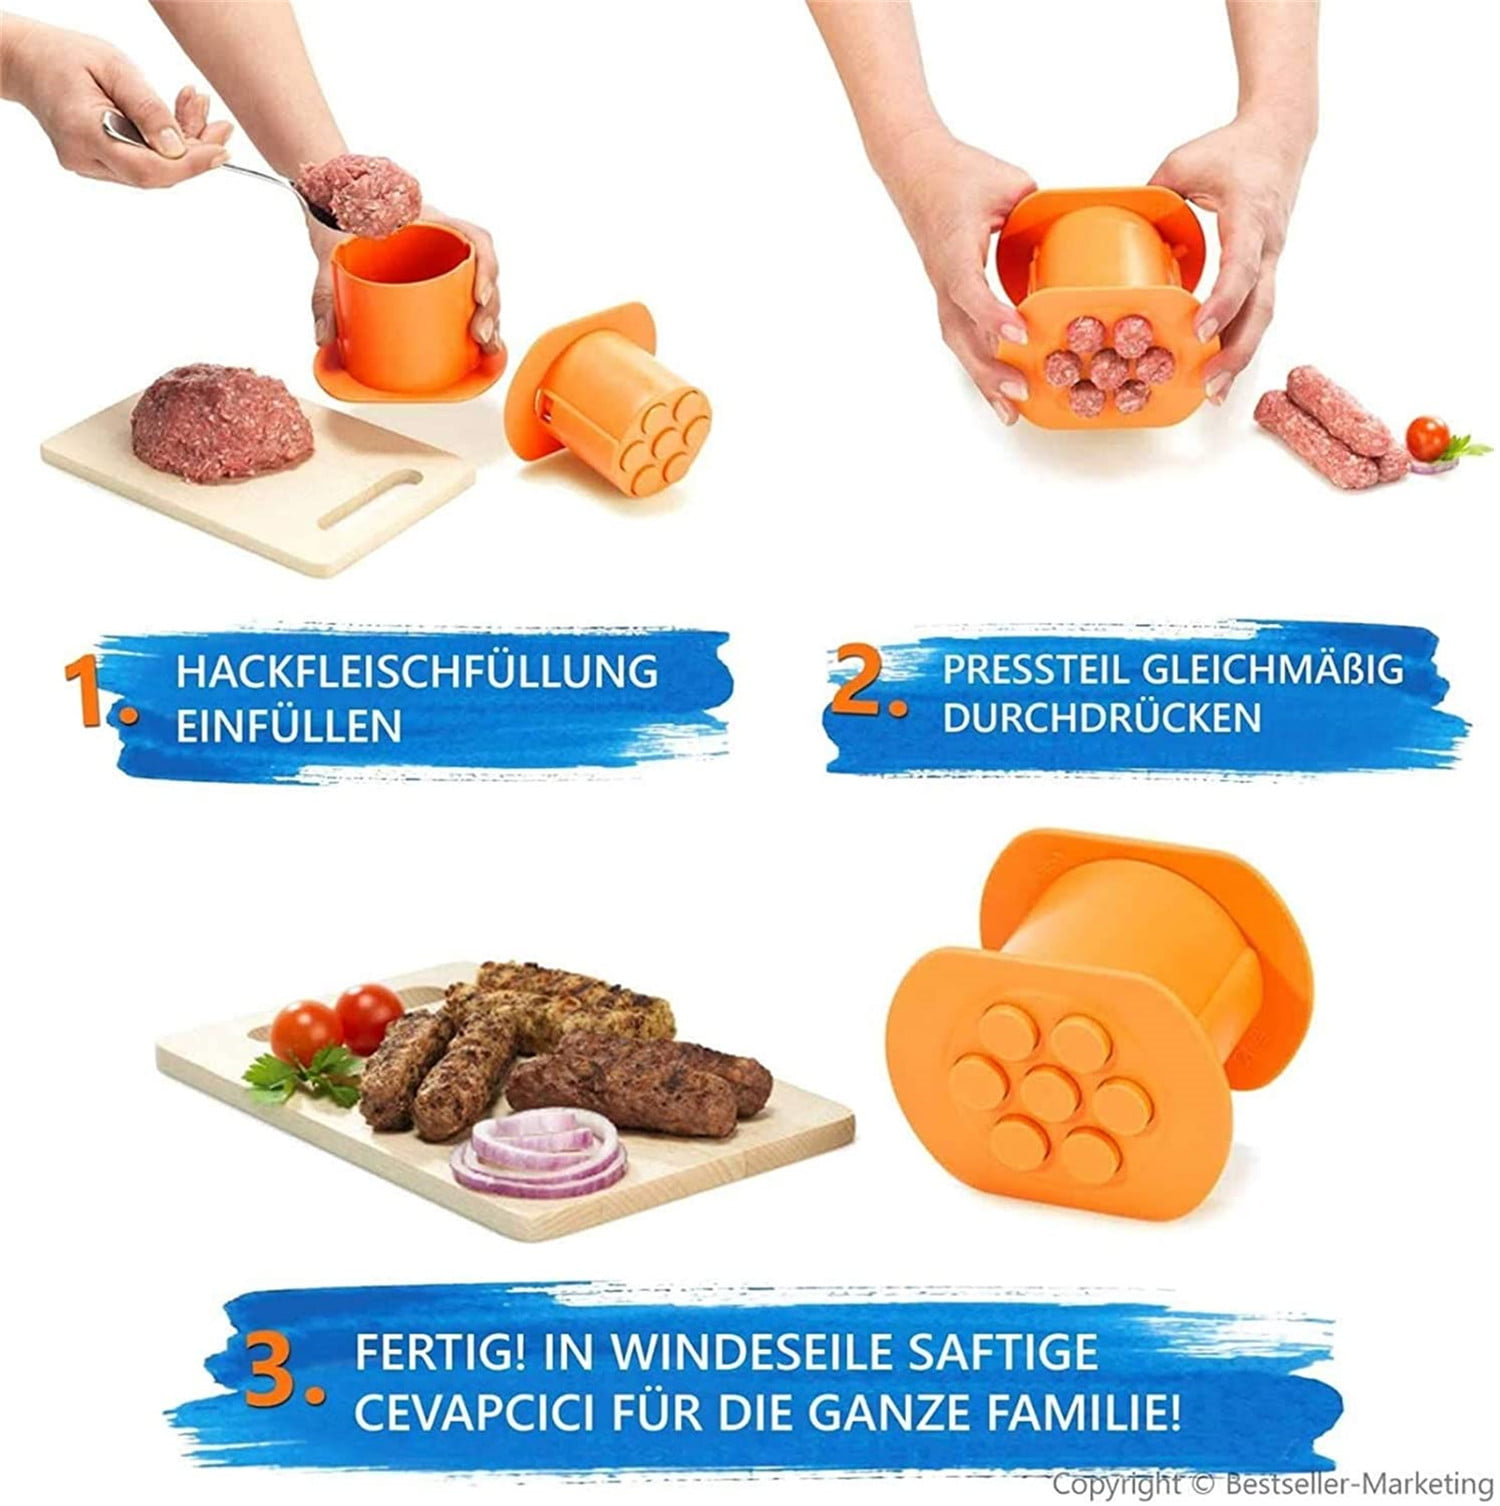 Sausage Hot Dog Maker Meat Strip Squeezer Barbecue Grill Accessories Making Delicious Stuffed Sausages Orange Manual Sausage Maker Hot Dog Maker with 7 Holes One Press Cevapcici Maker